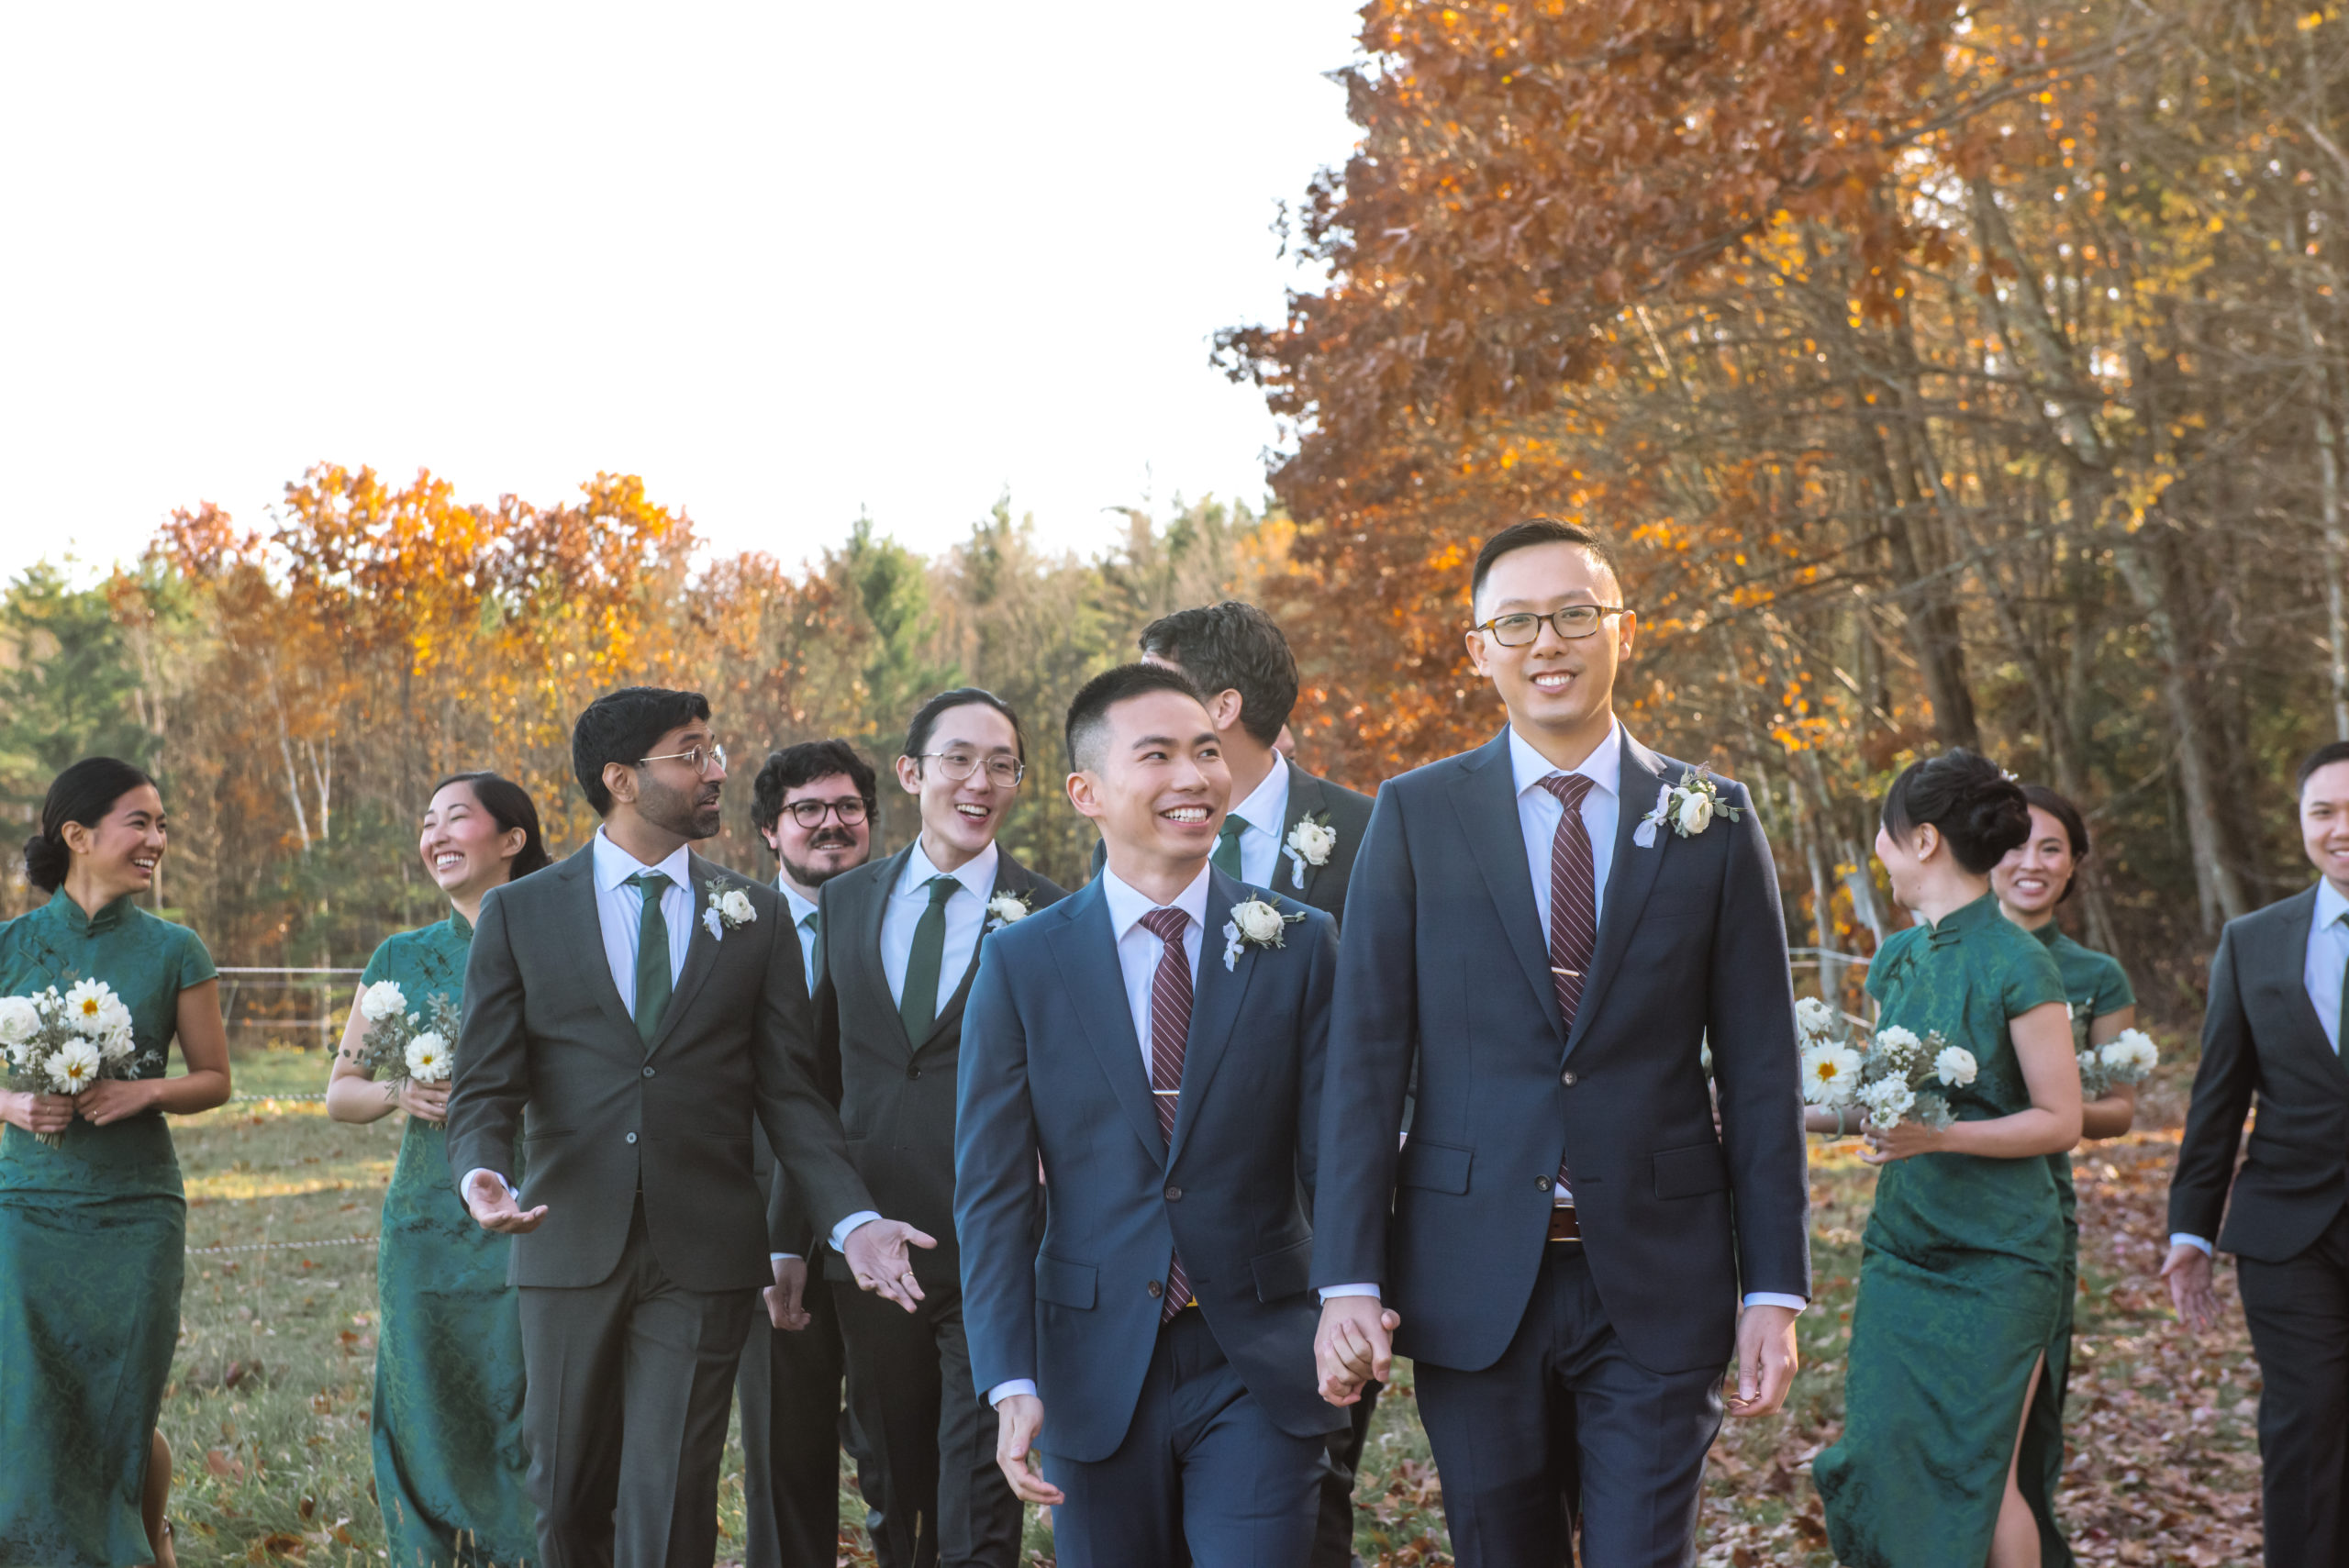 Two grooms walking hand in hand, one looking directly to camera and the other looking up to his partner. Their wedding party is following them behind and everyone is smiling. Autumnal trees are in the background.